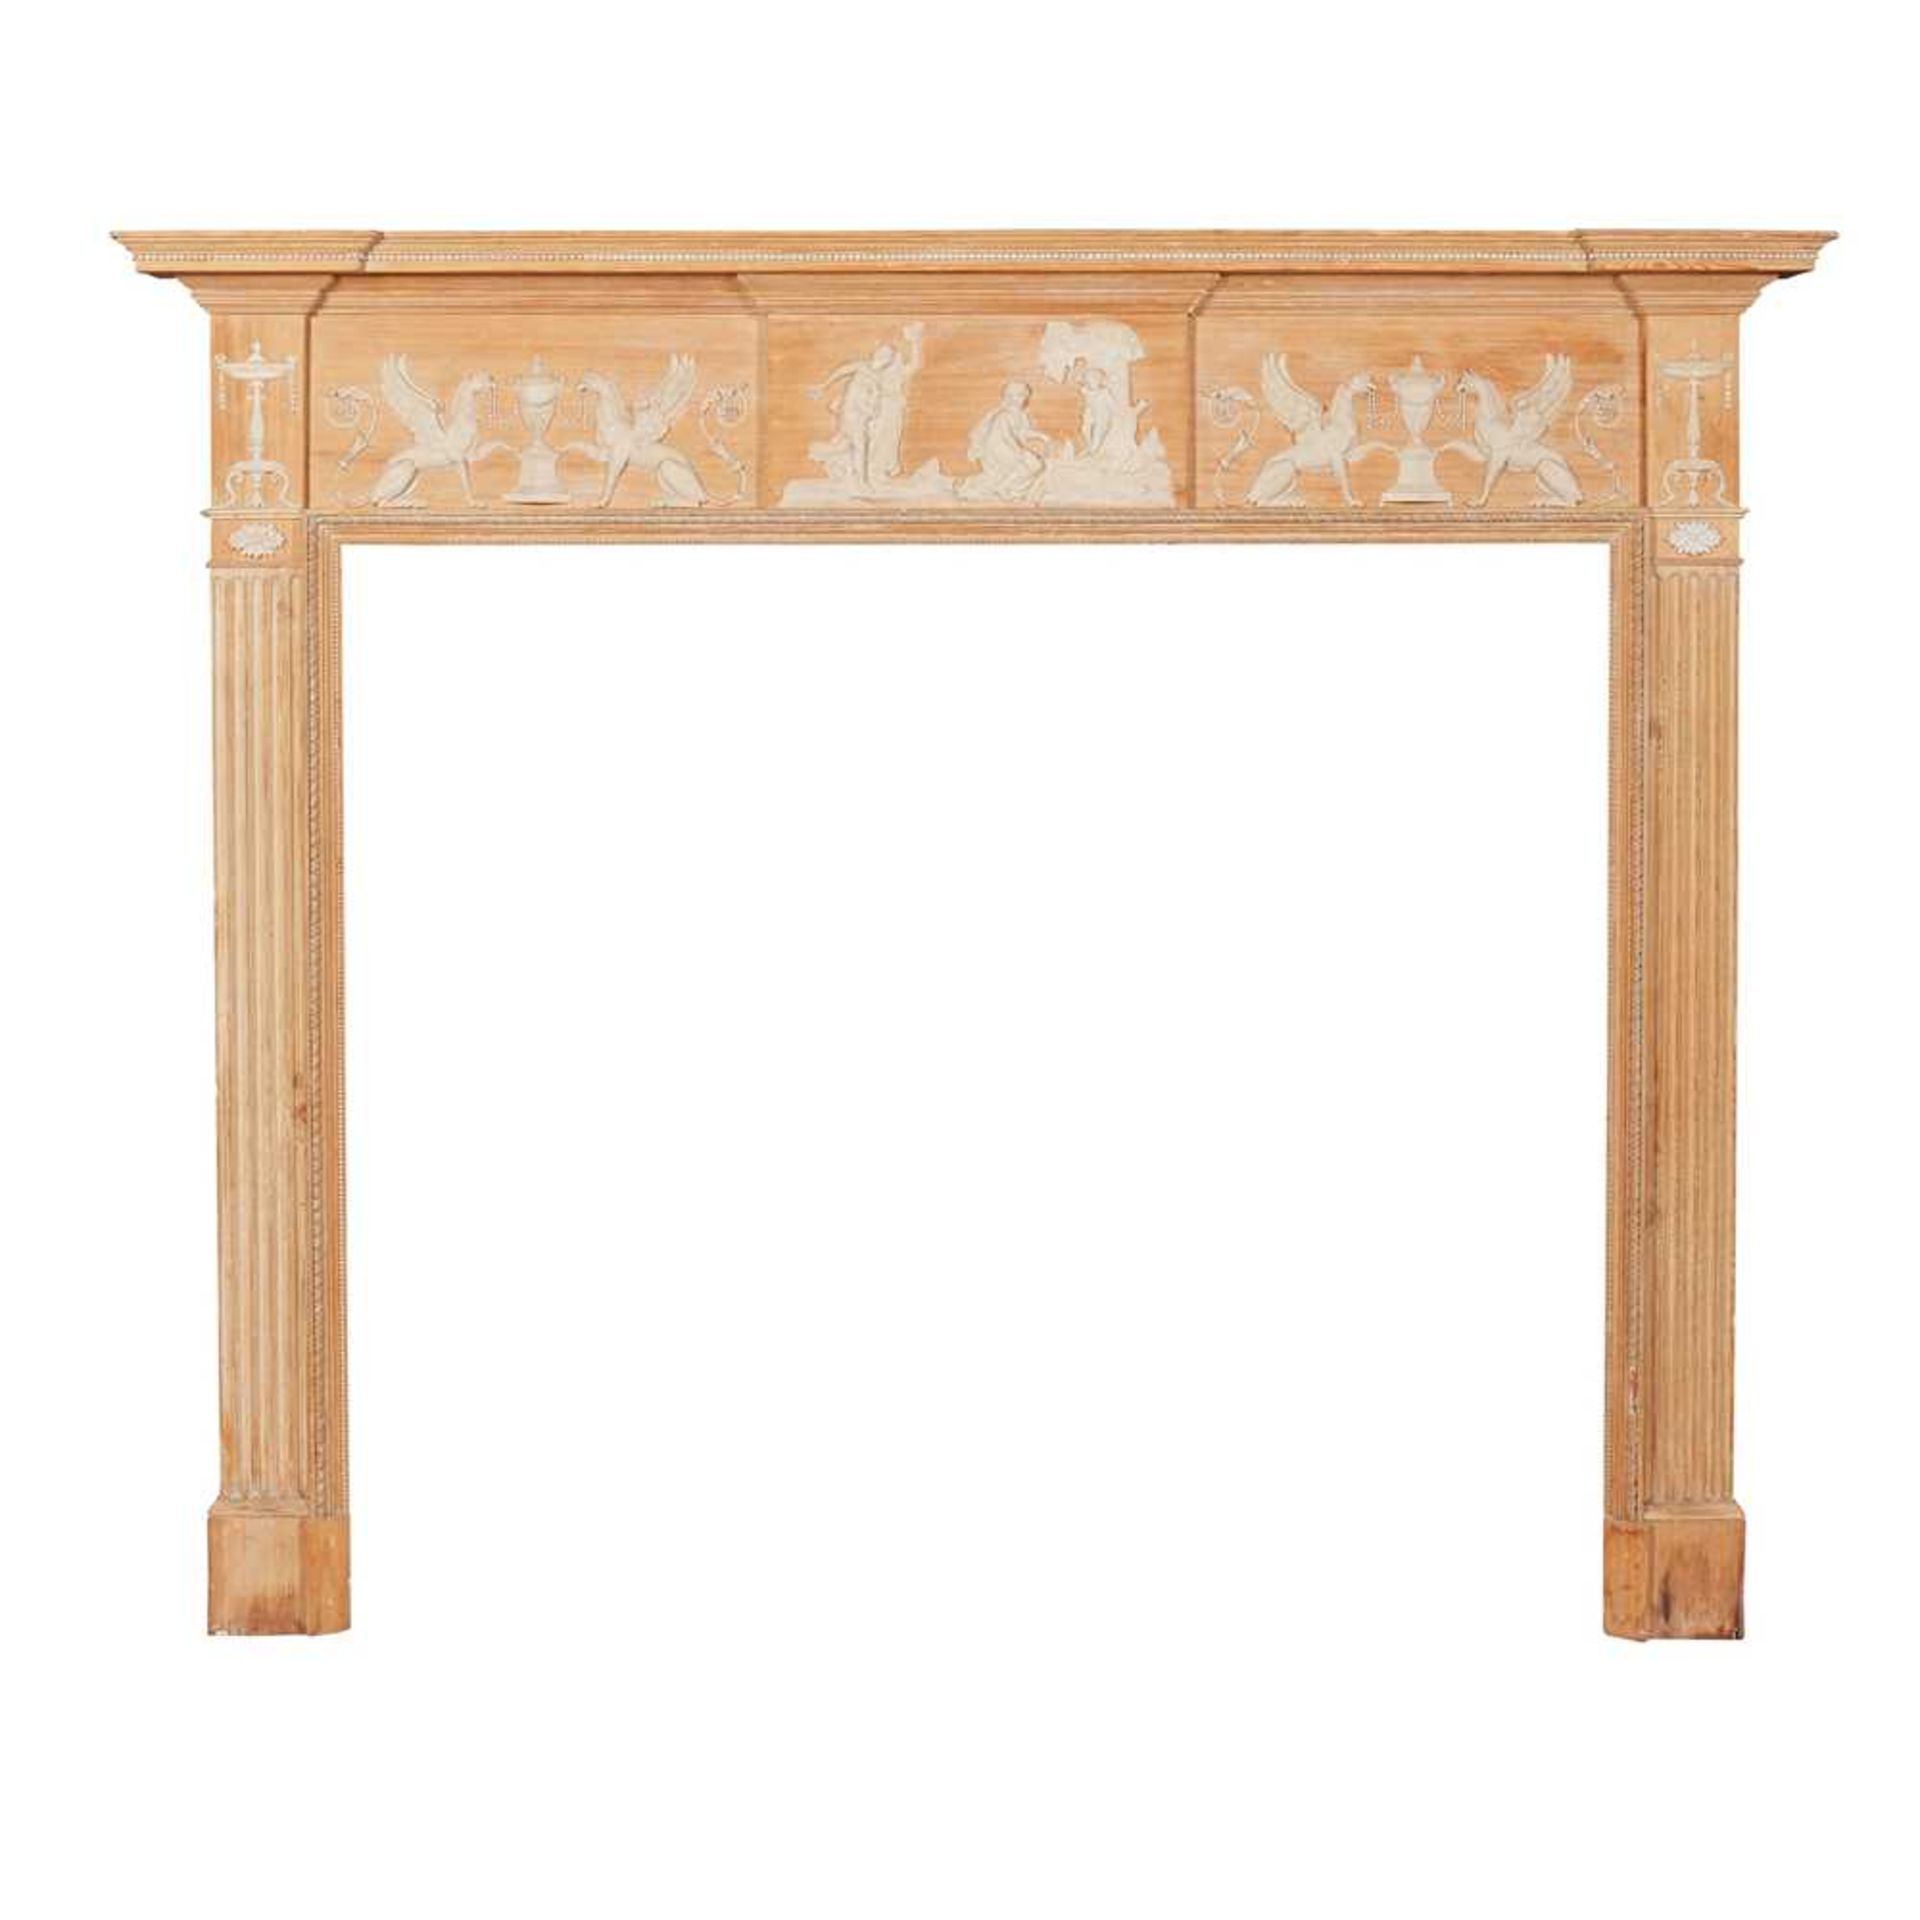 REGENCY PINE AND GESSO FIRE SURROUND EARLY 19TH CENTURY